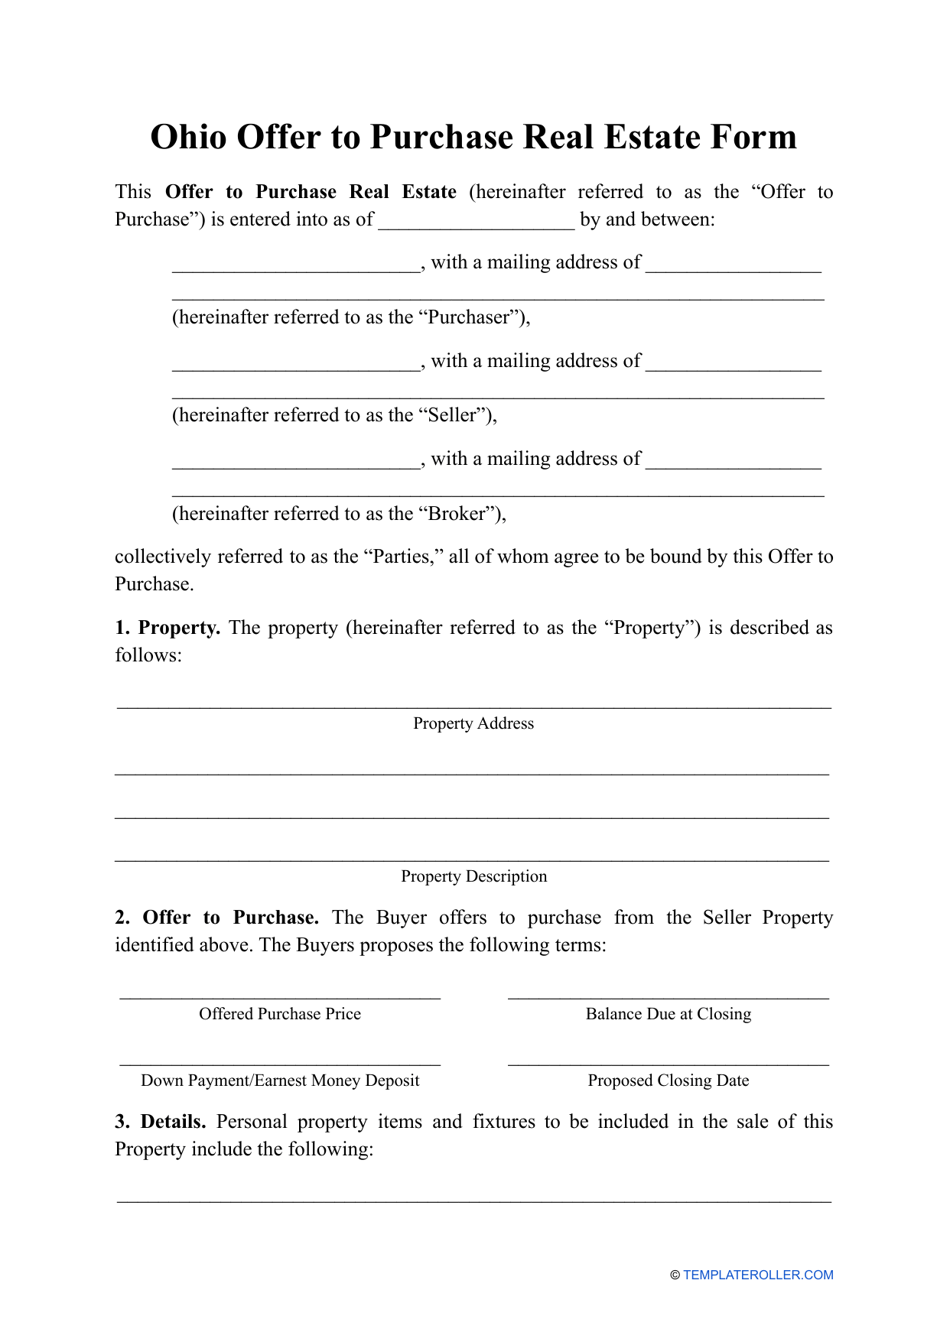 Offer to Purchase Real Estate Form - Ohio, Page 1